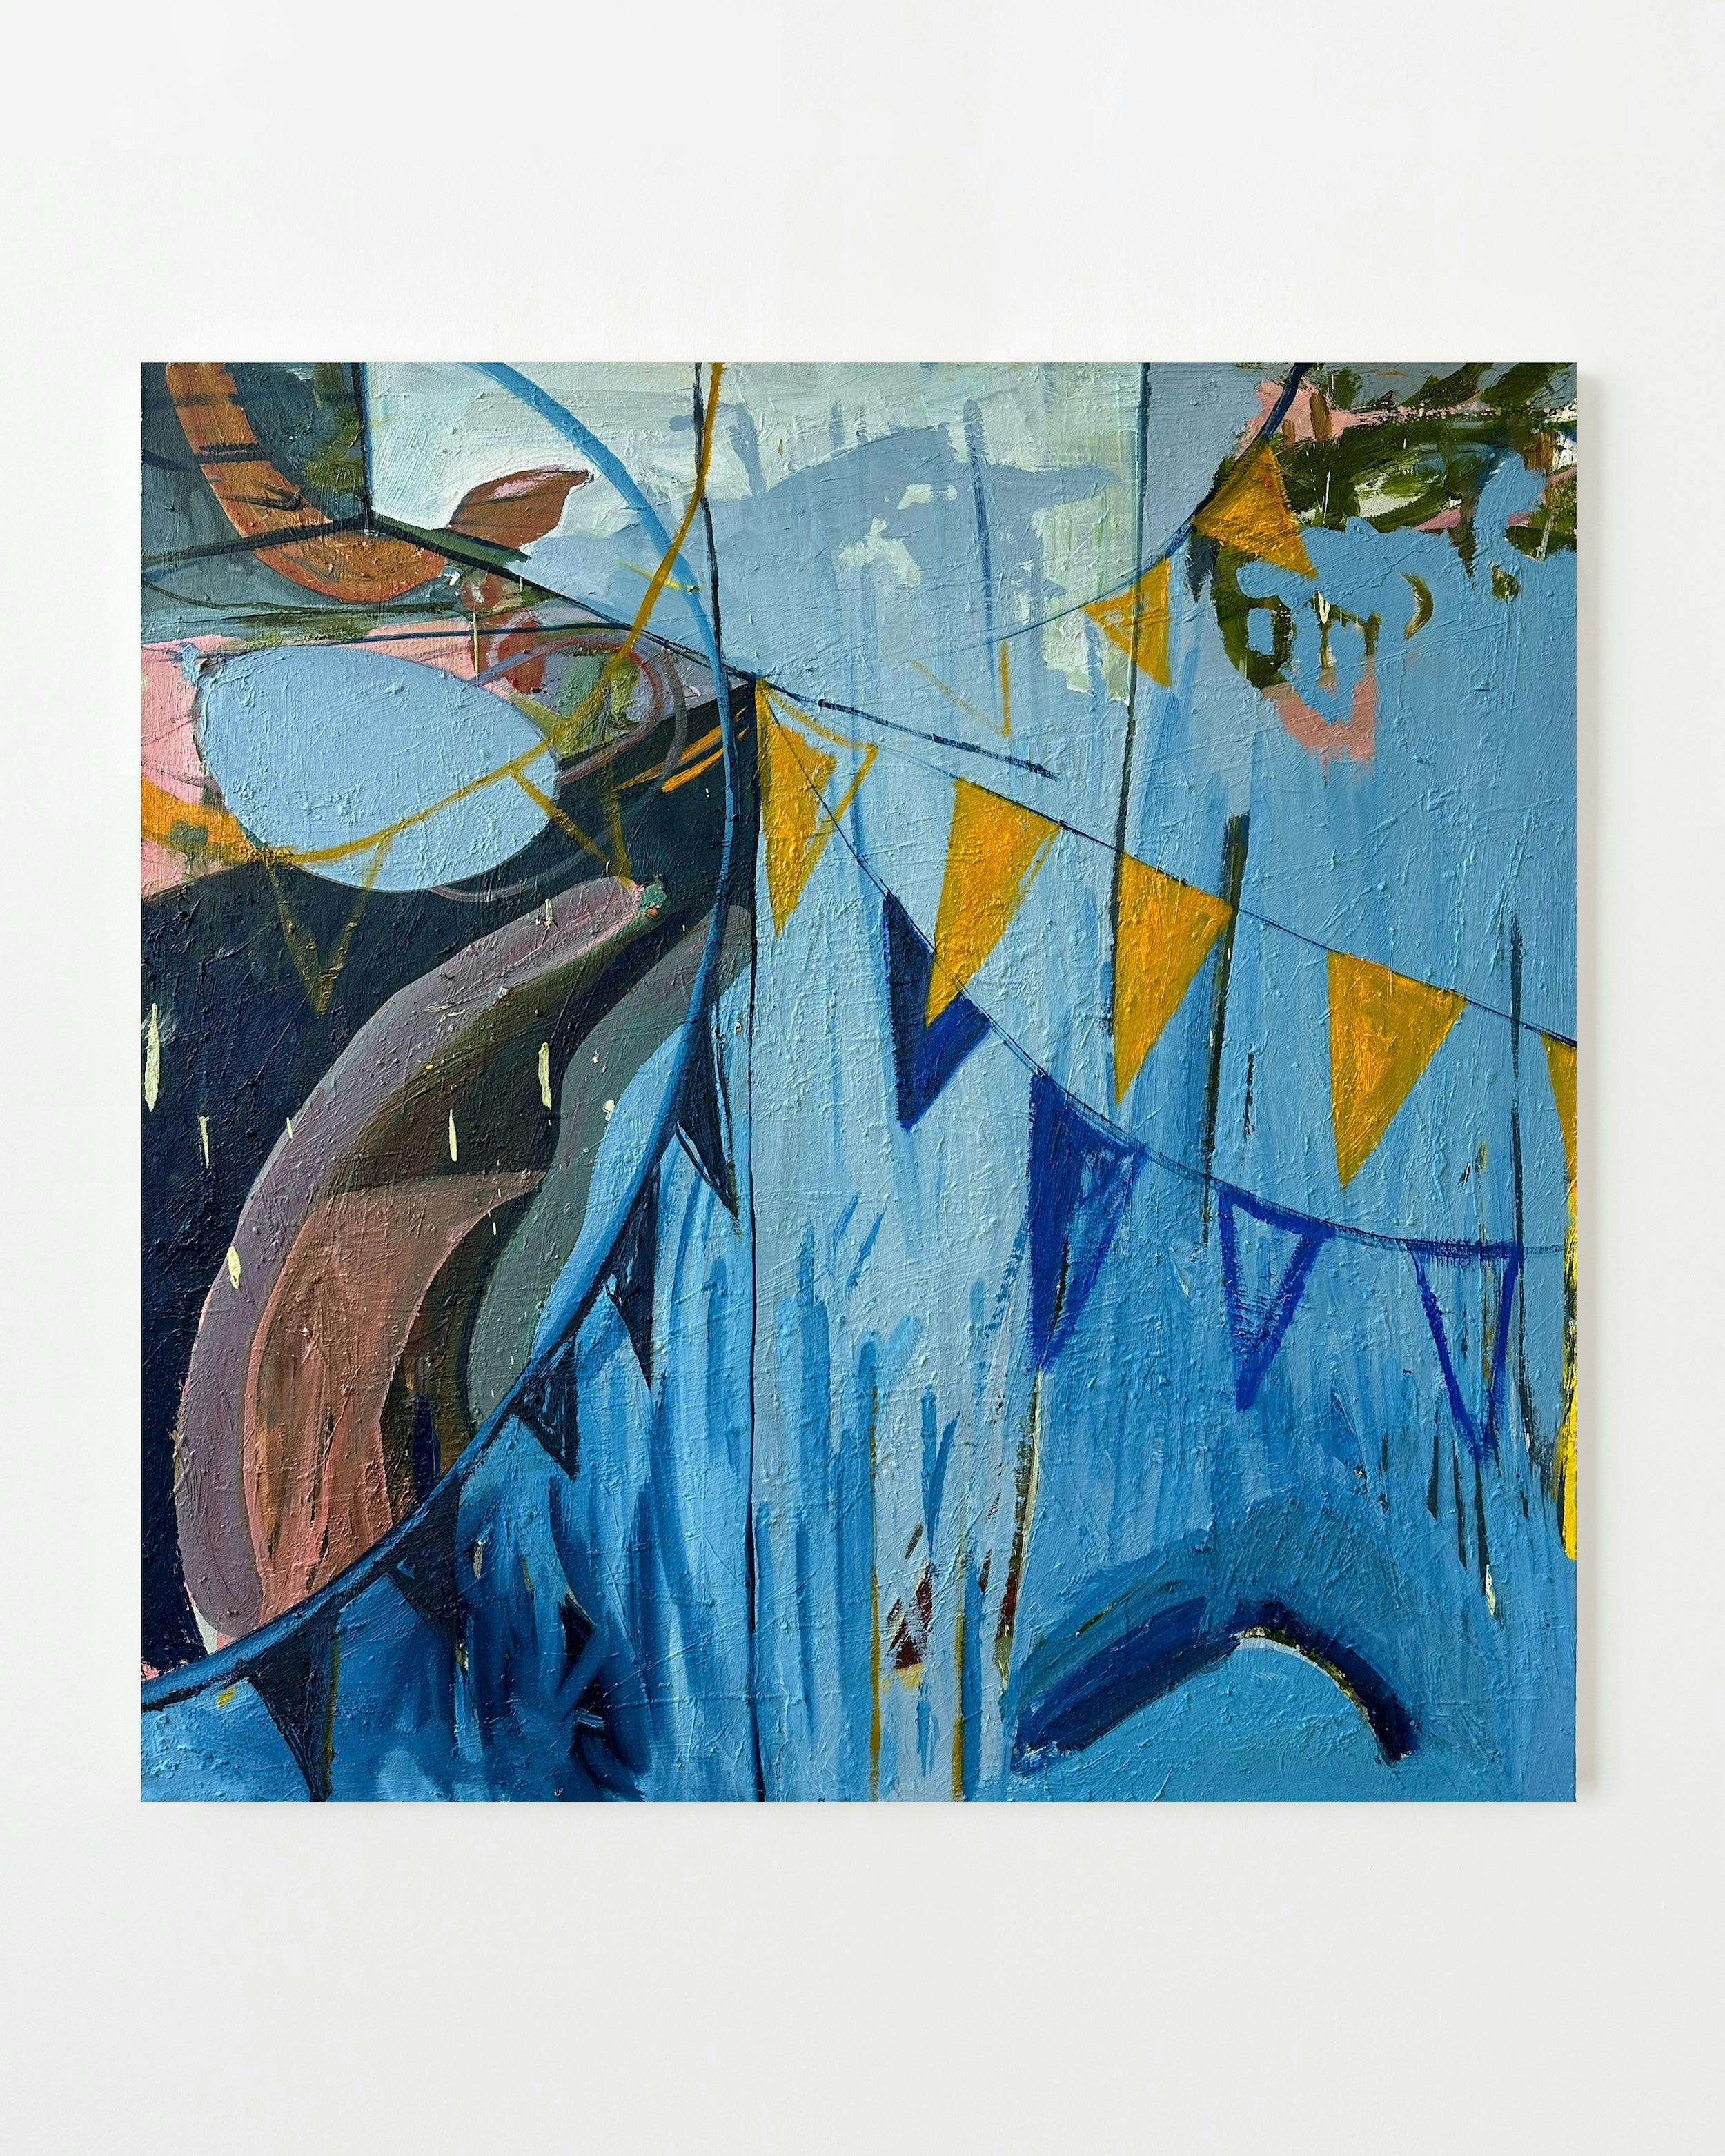 Painting by Diana Delgado titled "Repainted (Pennants)".